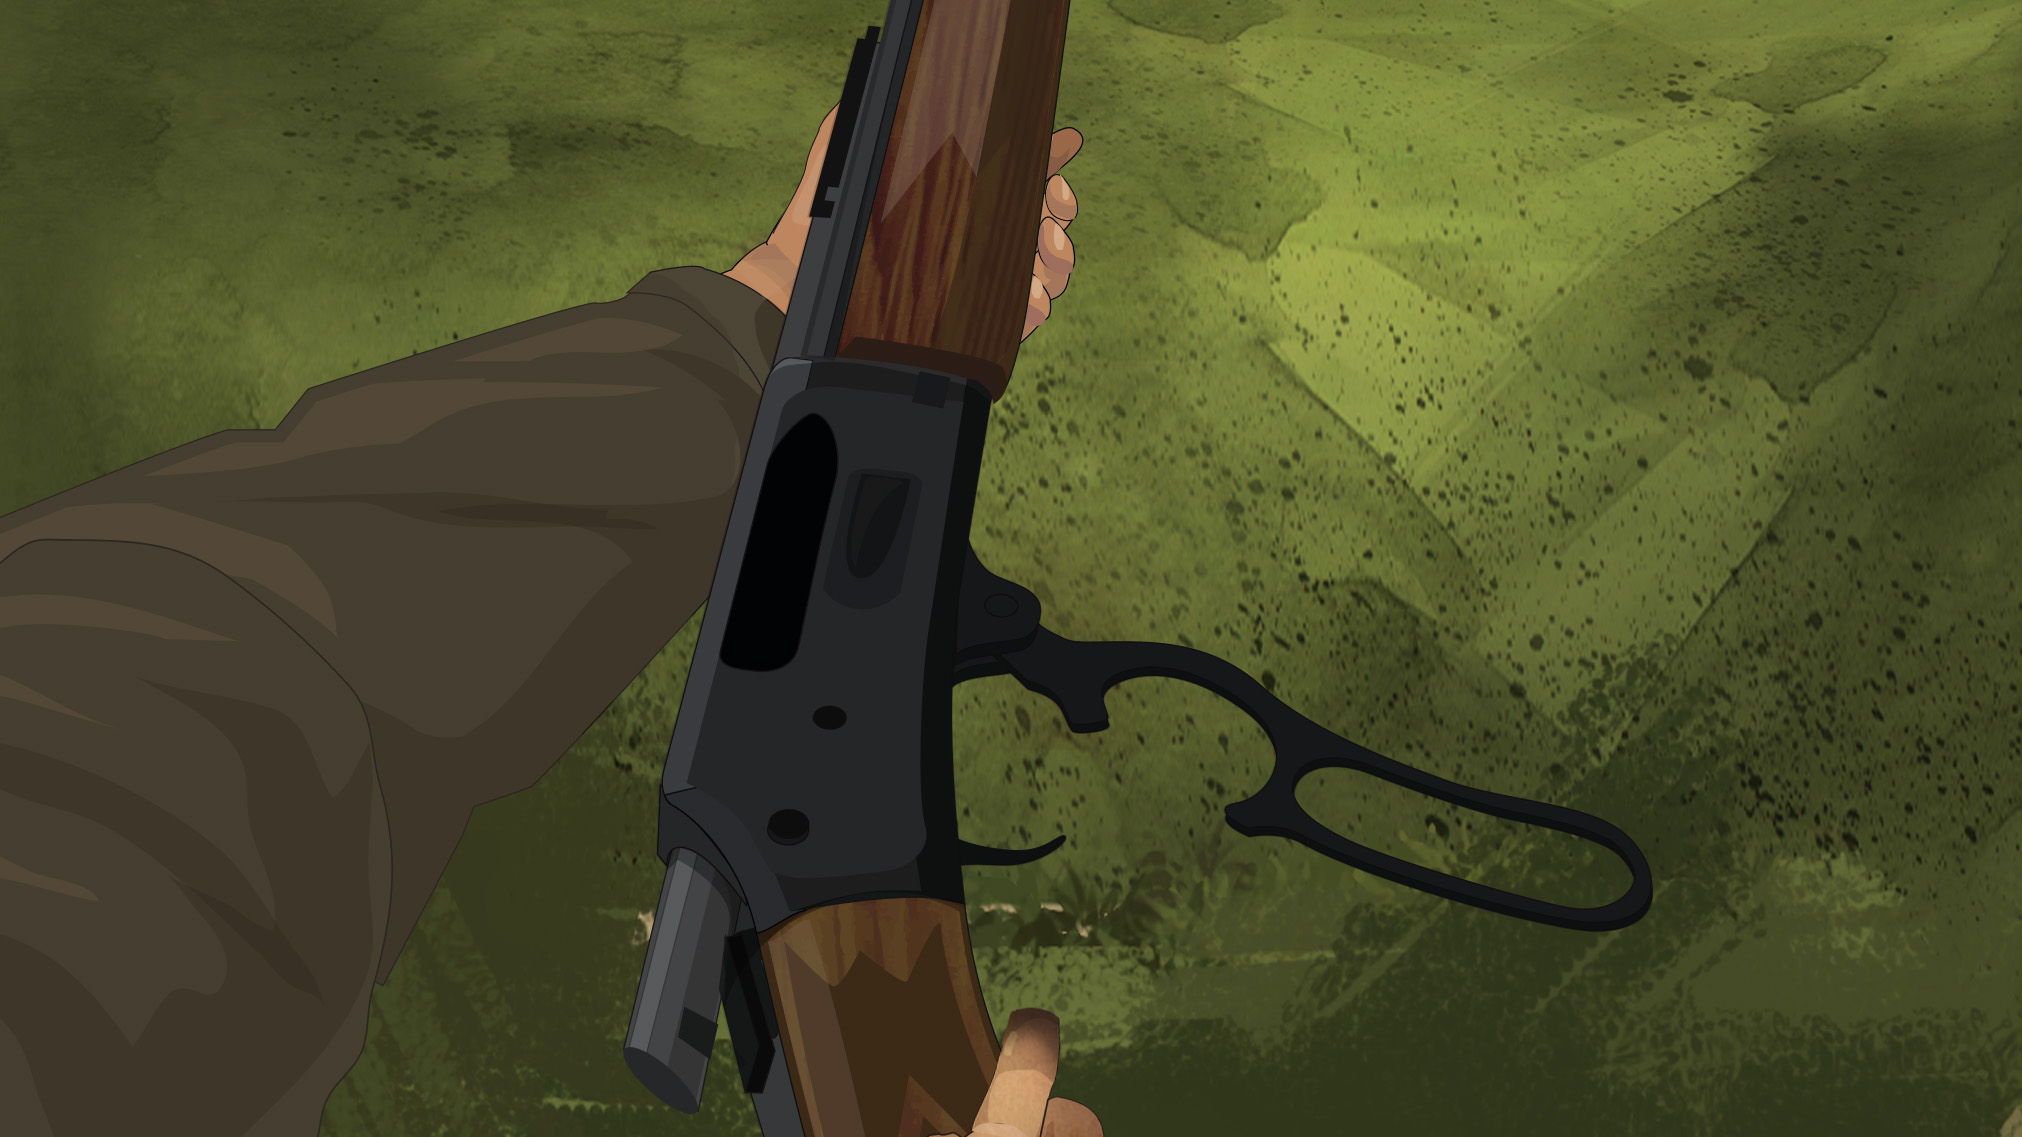 Illustration of a hunter's hands holding a lever action rifle on its side with the action open.